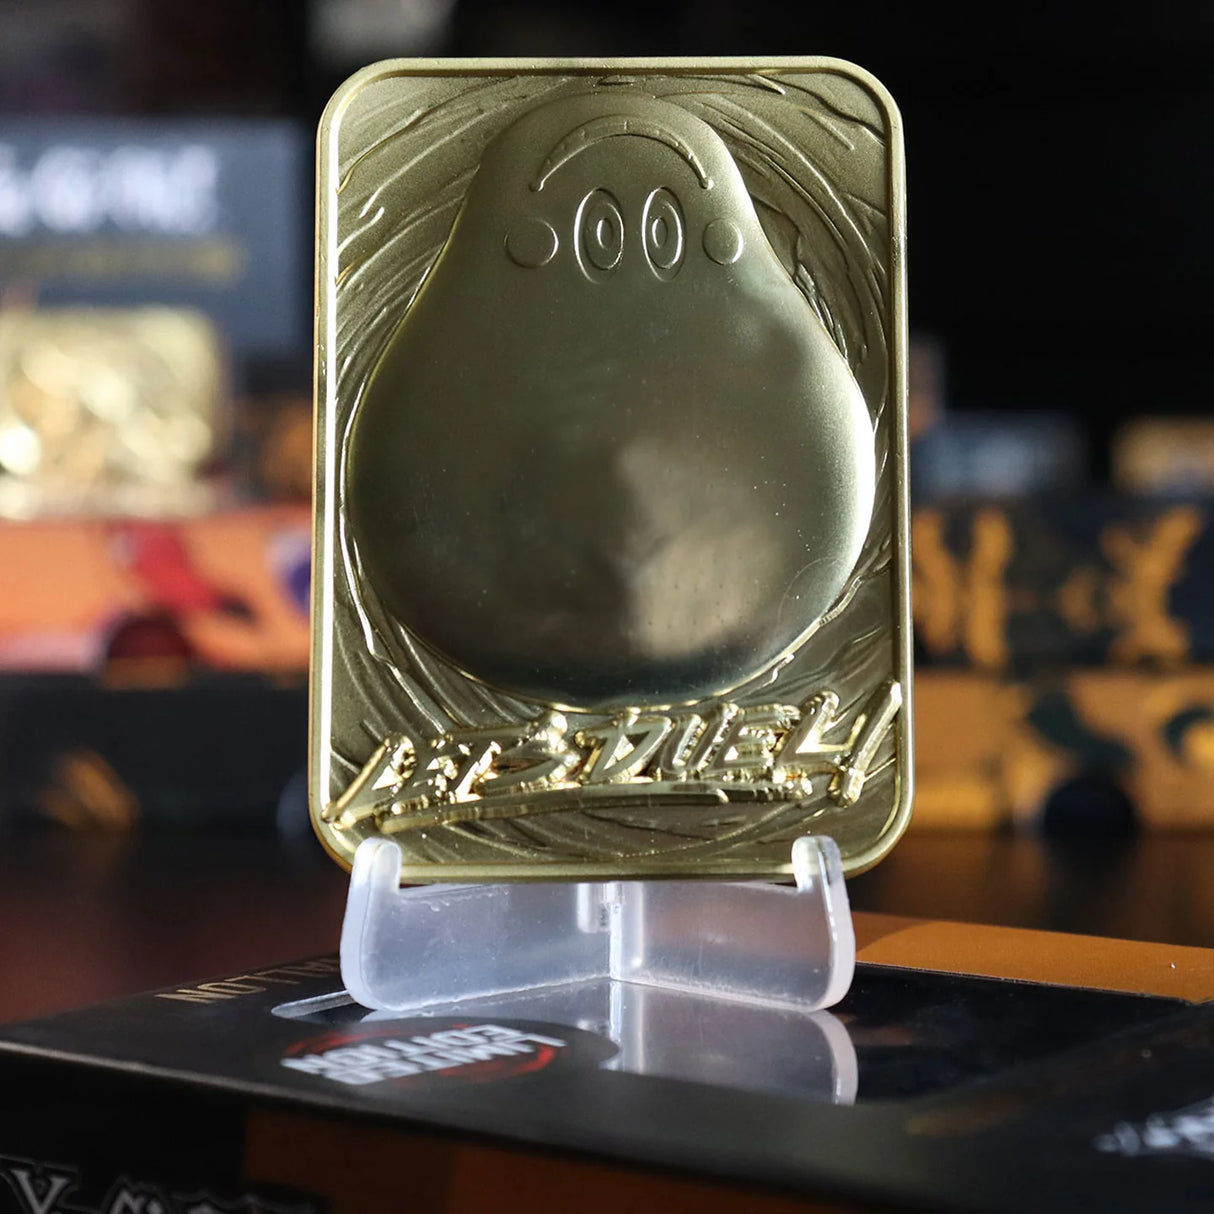 Yu-Gi-Oh! | Limited Edition | 24k Gold Plated Metal Card | Marshmallon